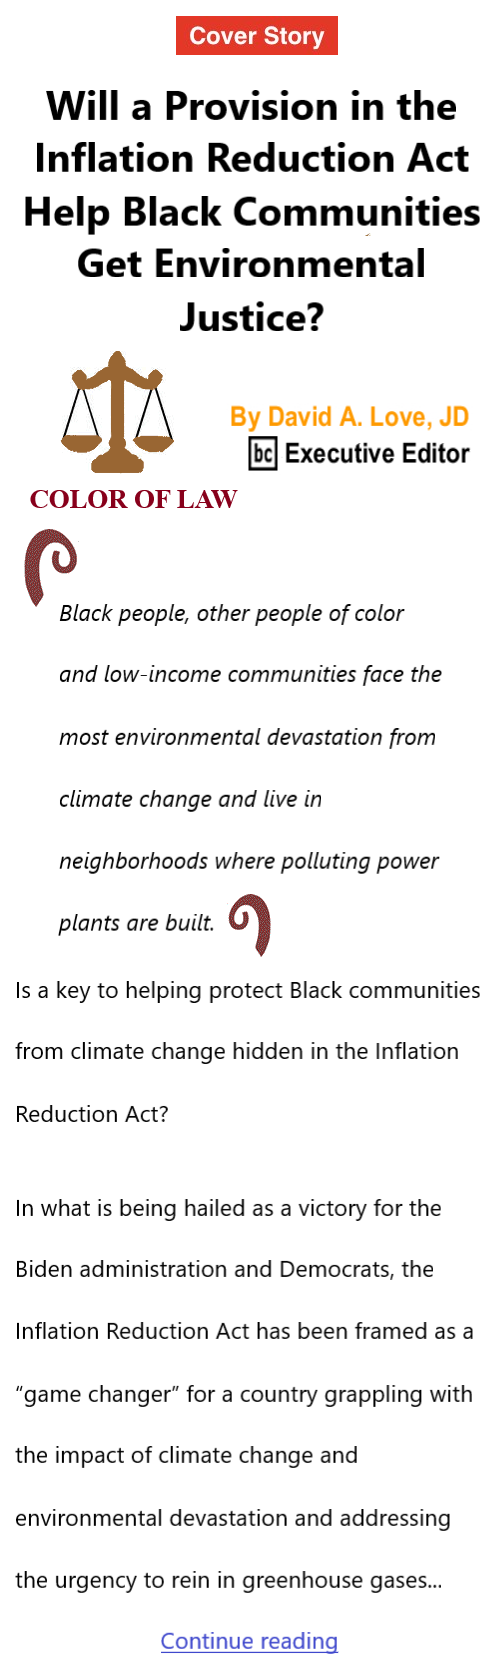 BlackCommentator.com Sept 8, 2022 - Issue 922: Cover Story - Will a Provision in the Inflation Reduction Act Help Black Communities Get Environmental Justice? - Color of Law By David A. Love, JD, BC Executive Editor